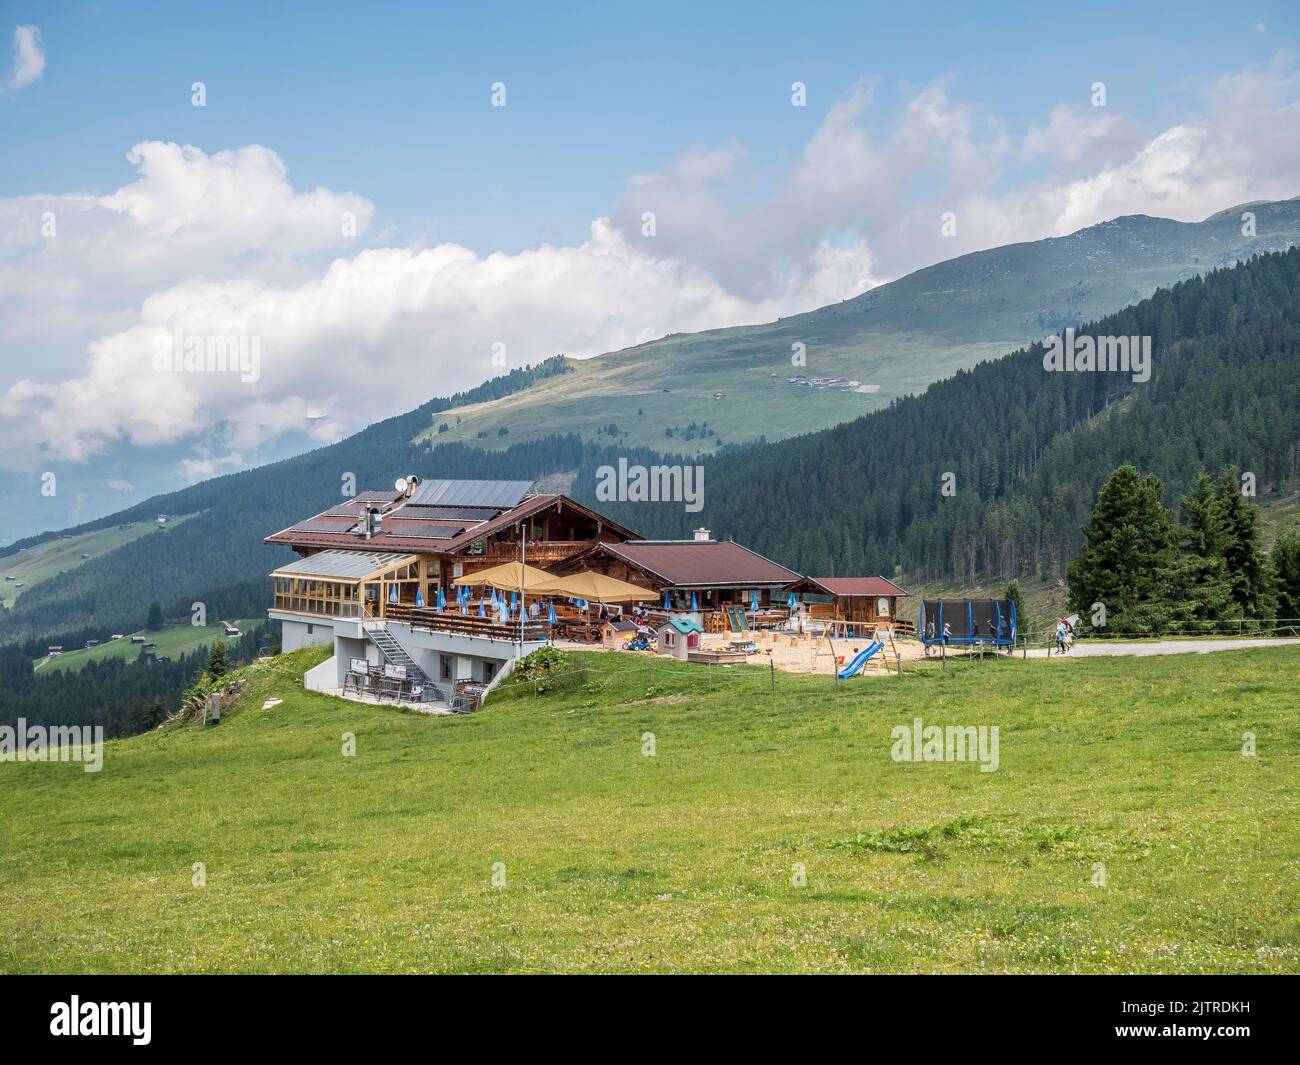 The image is of the Wiesenalm high alp recreation area located above the small town of Zell am Ziller in the Zillertal valley of the Austrian Tirol Stock Photo